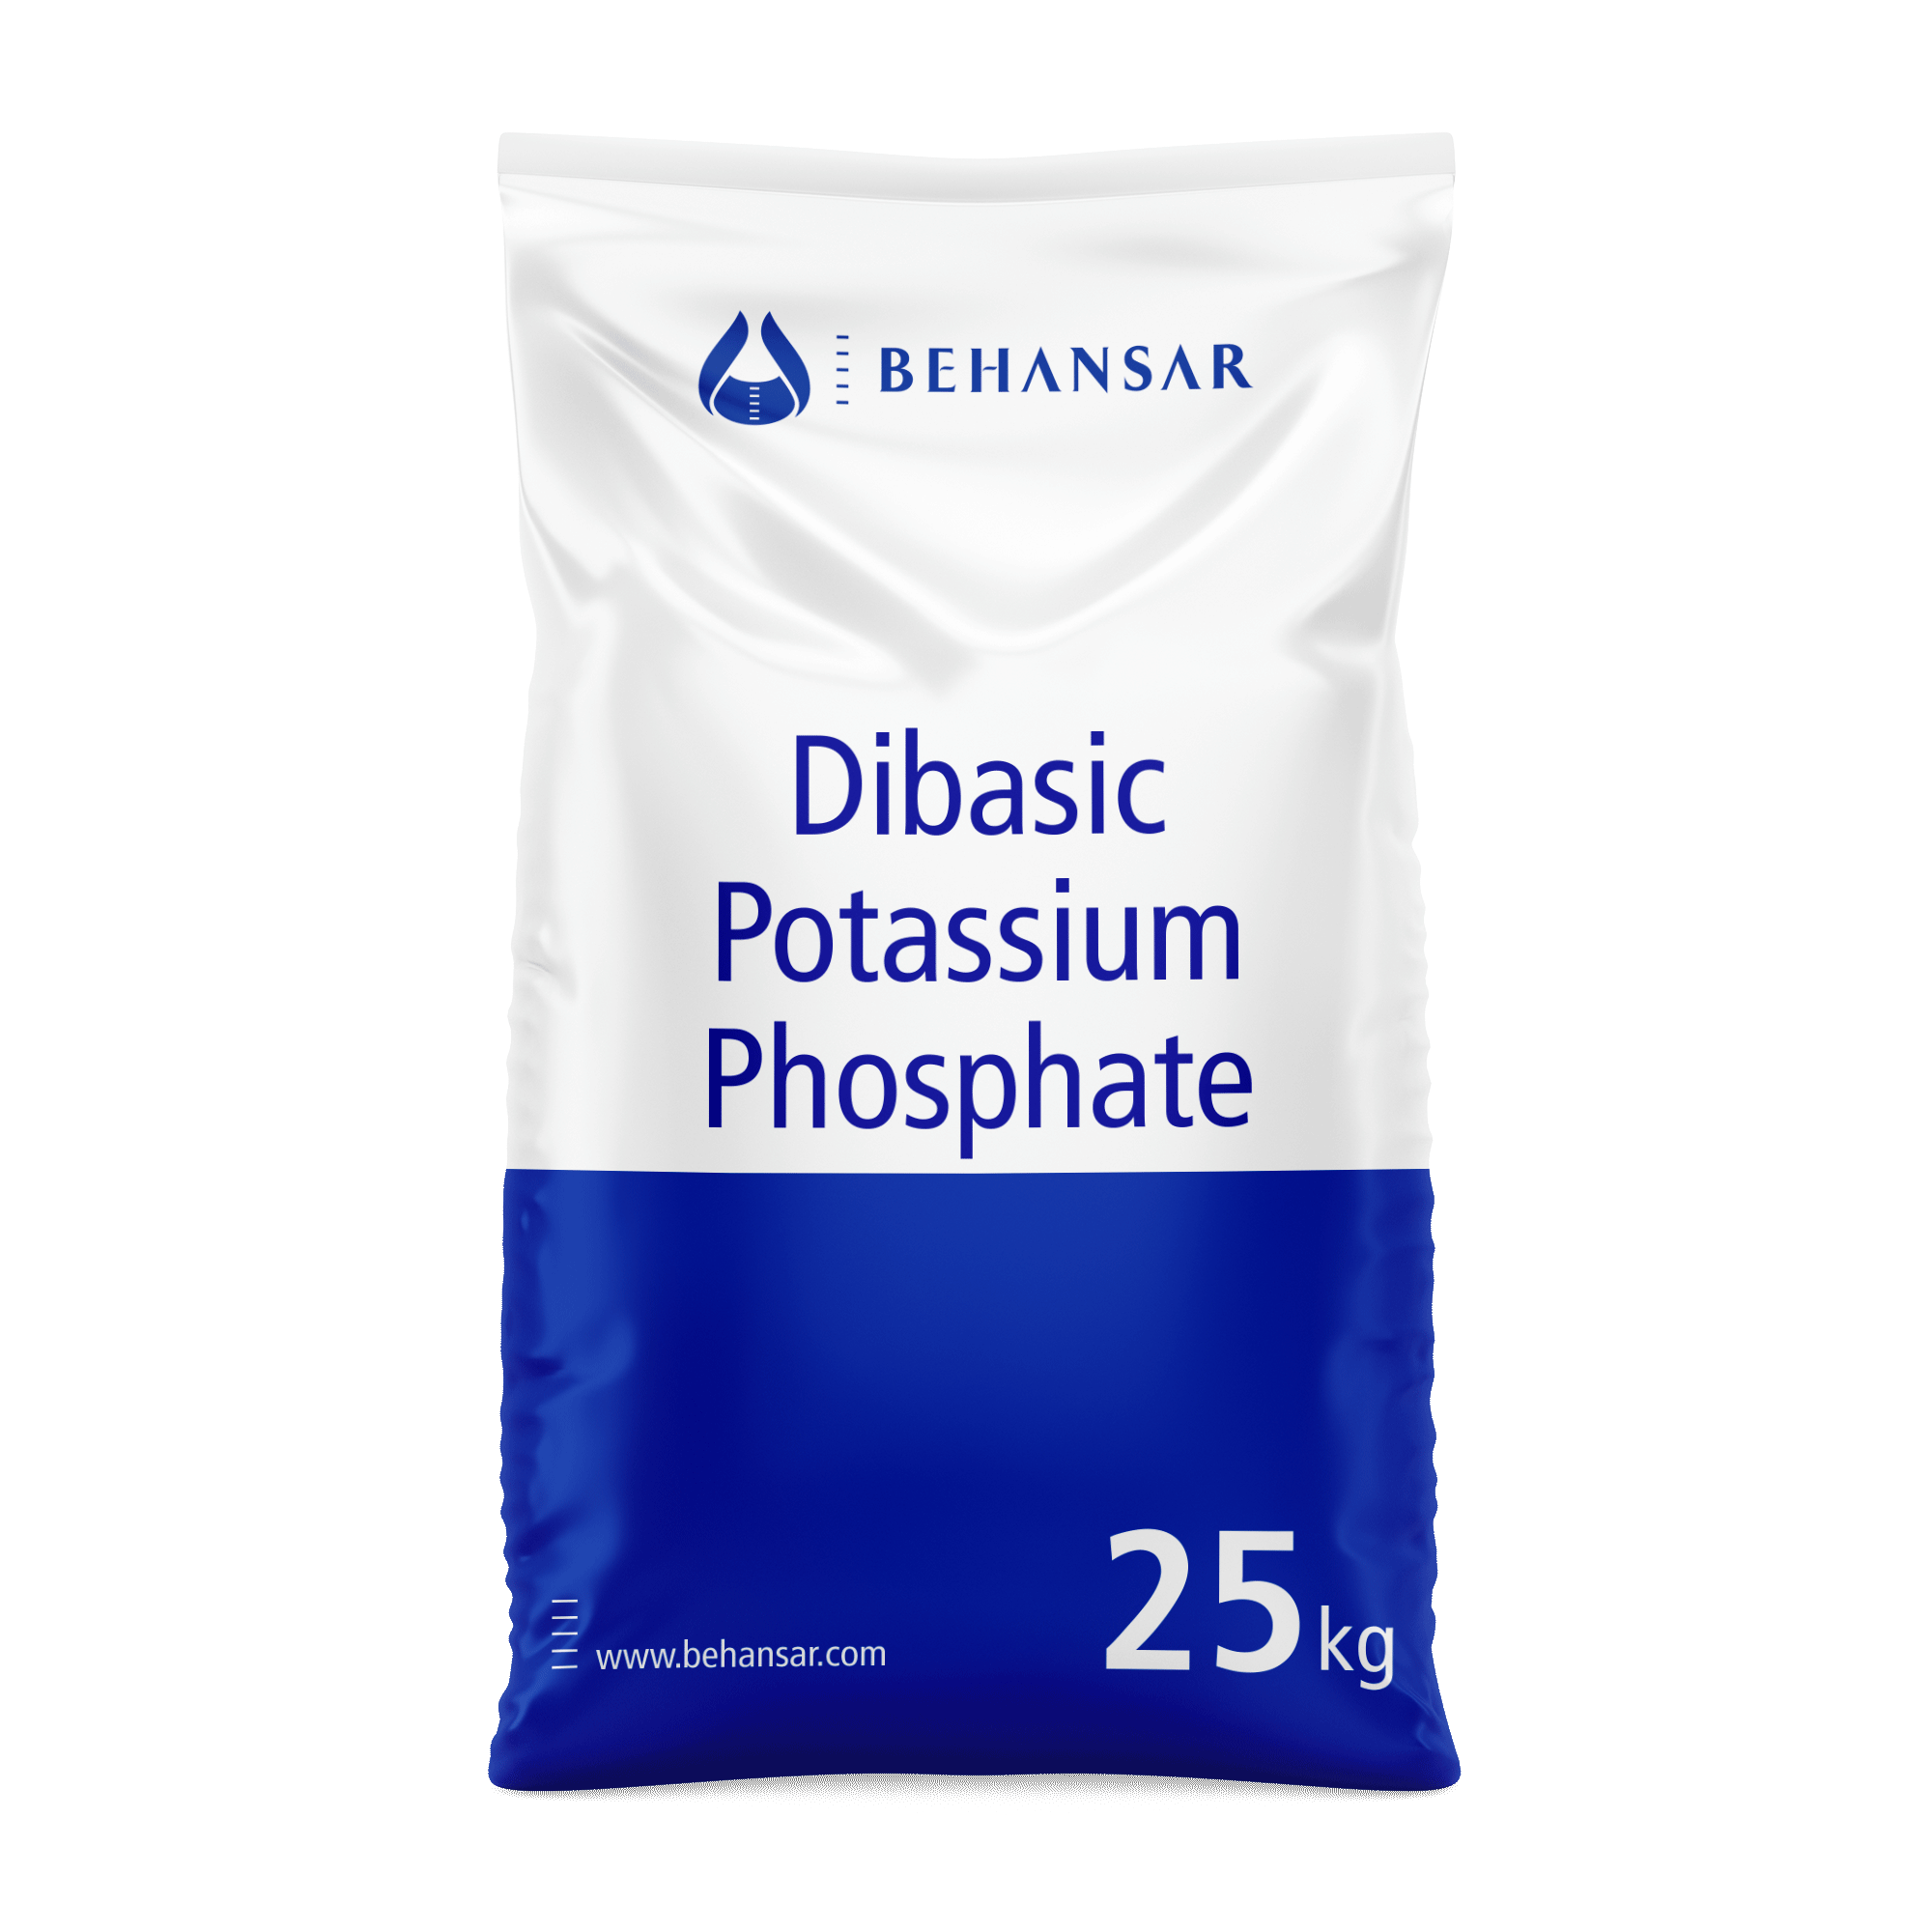 Dibasic Potassium Phosphate is one of the products of Behansar Co